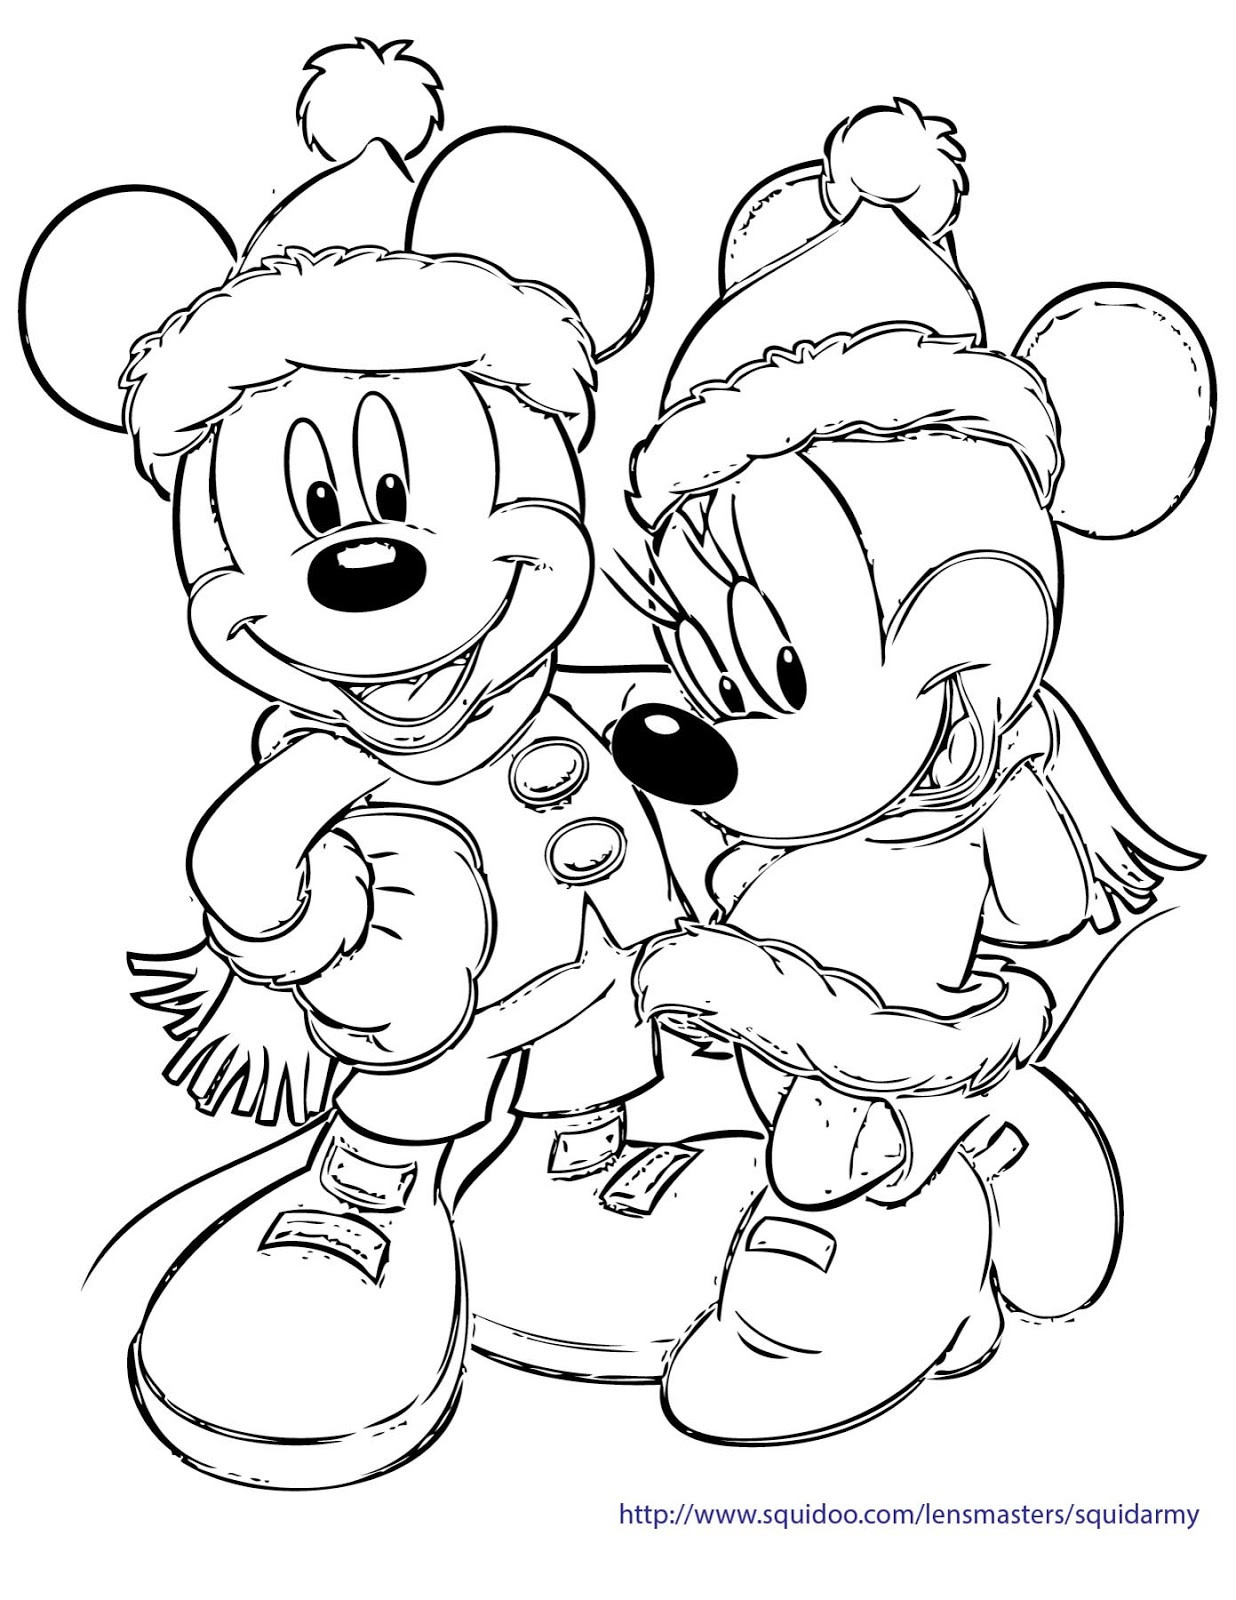 Christmas Coloring Book Pages
 Disney Christmas Coloring Pages – Happy Holidays